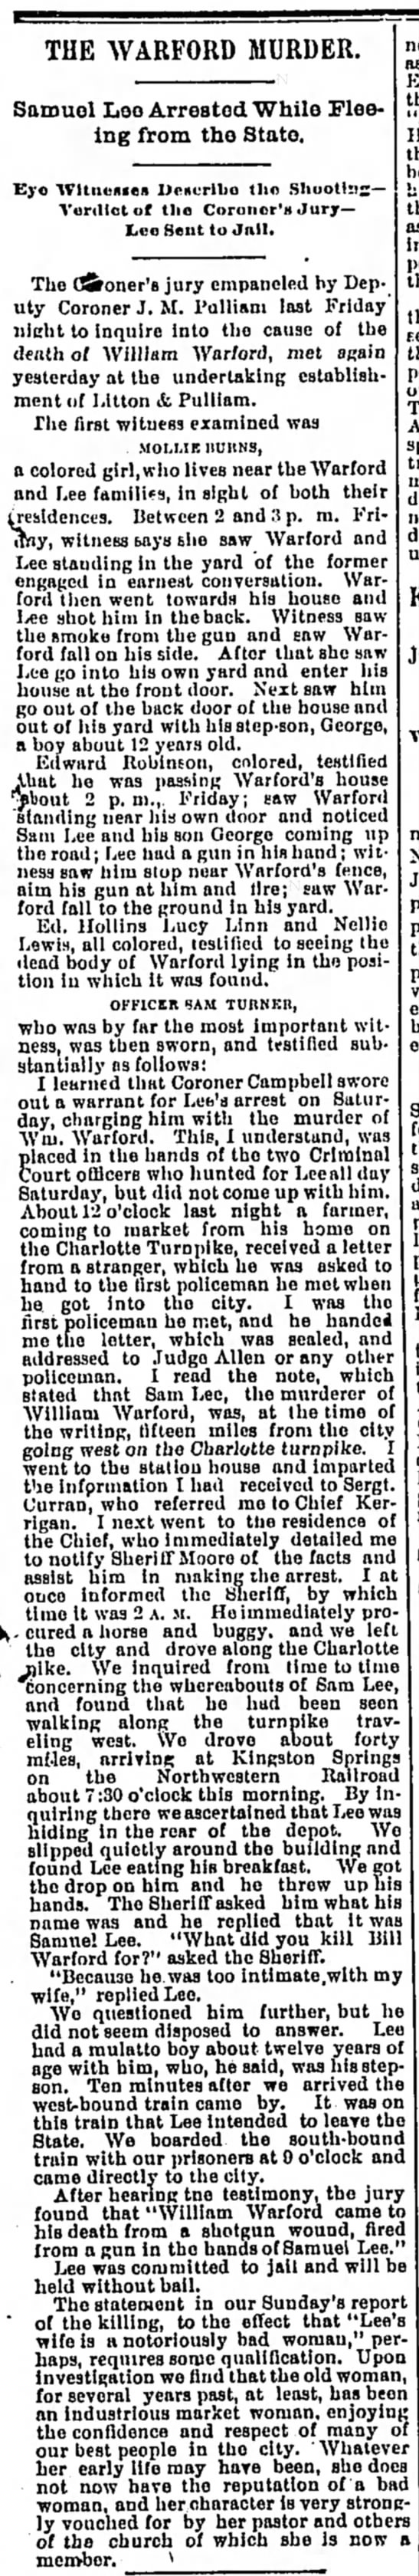 The Tennessean (Nashville, Tennessee), Tuesday, 30 September 1884, pg. 5.